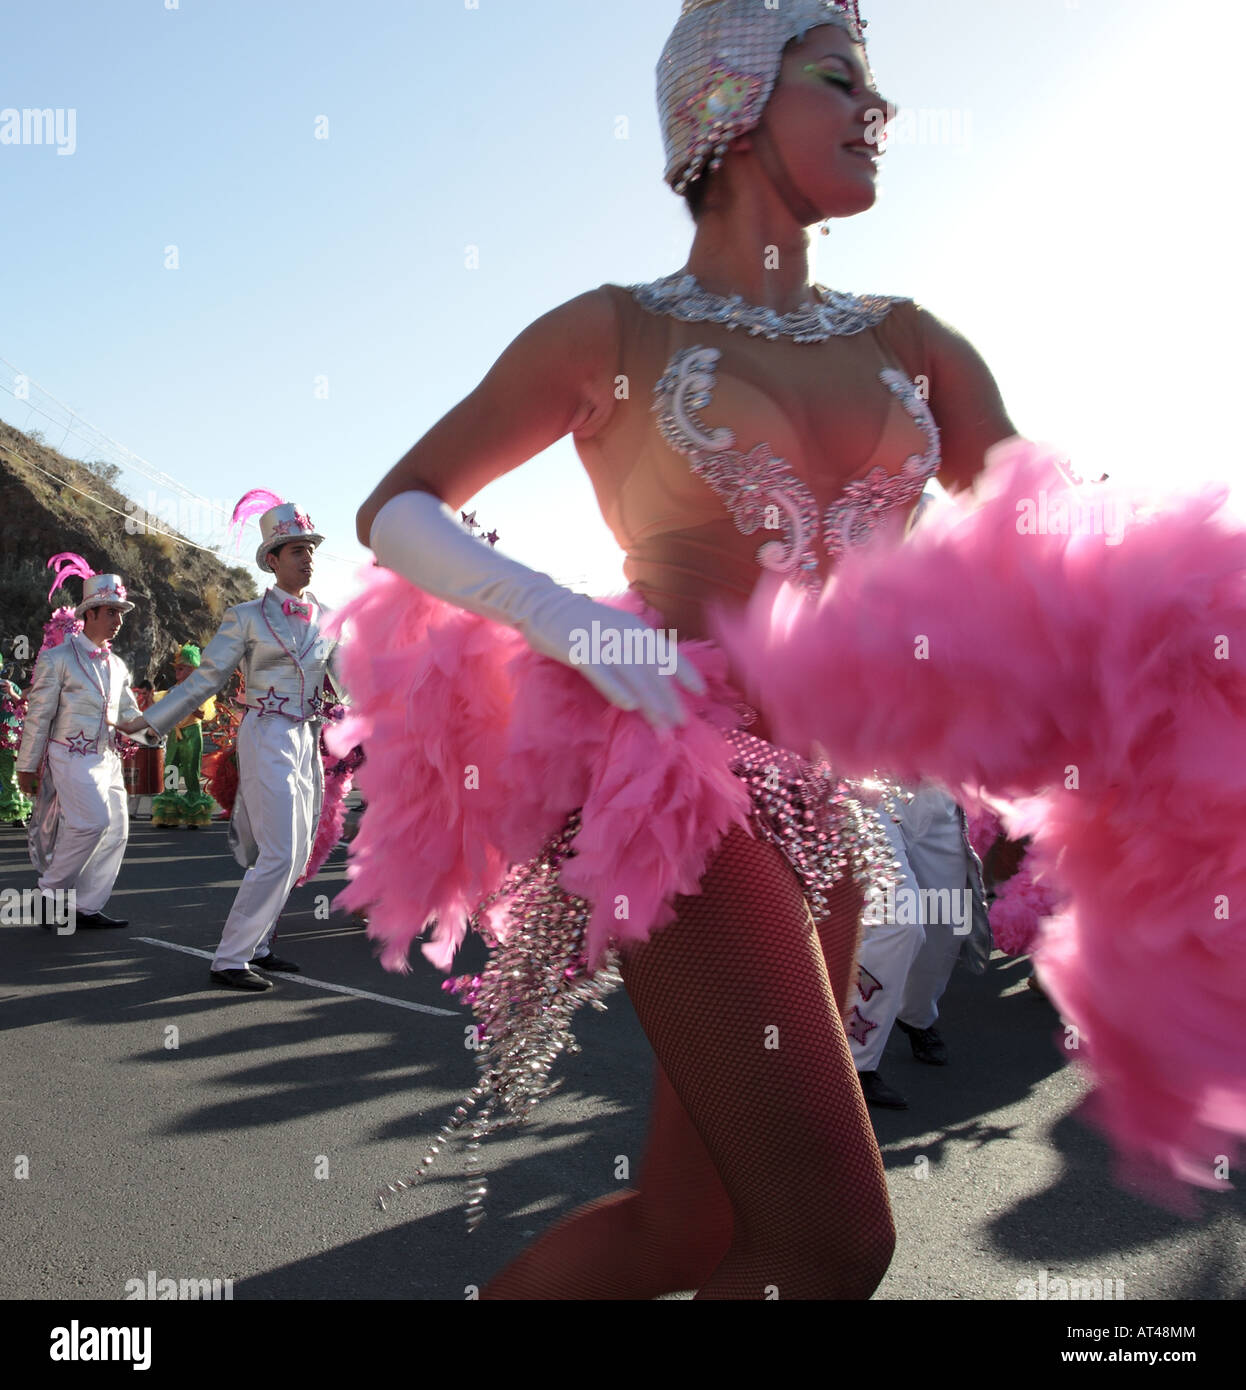 https://c8.alamy.com/comp/AT48MM/young-dancer-swirls-her-feathered-costume-in-th-carnaval-parade-los-AT48MM.jpg